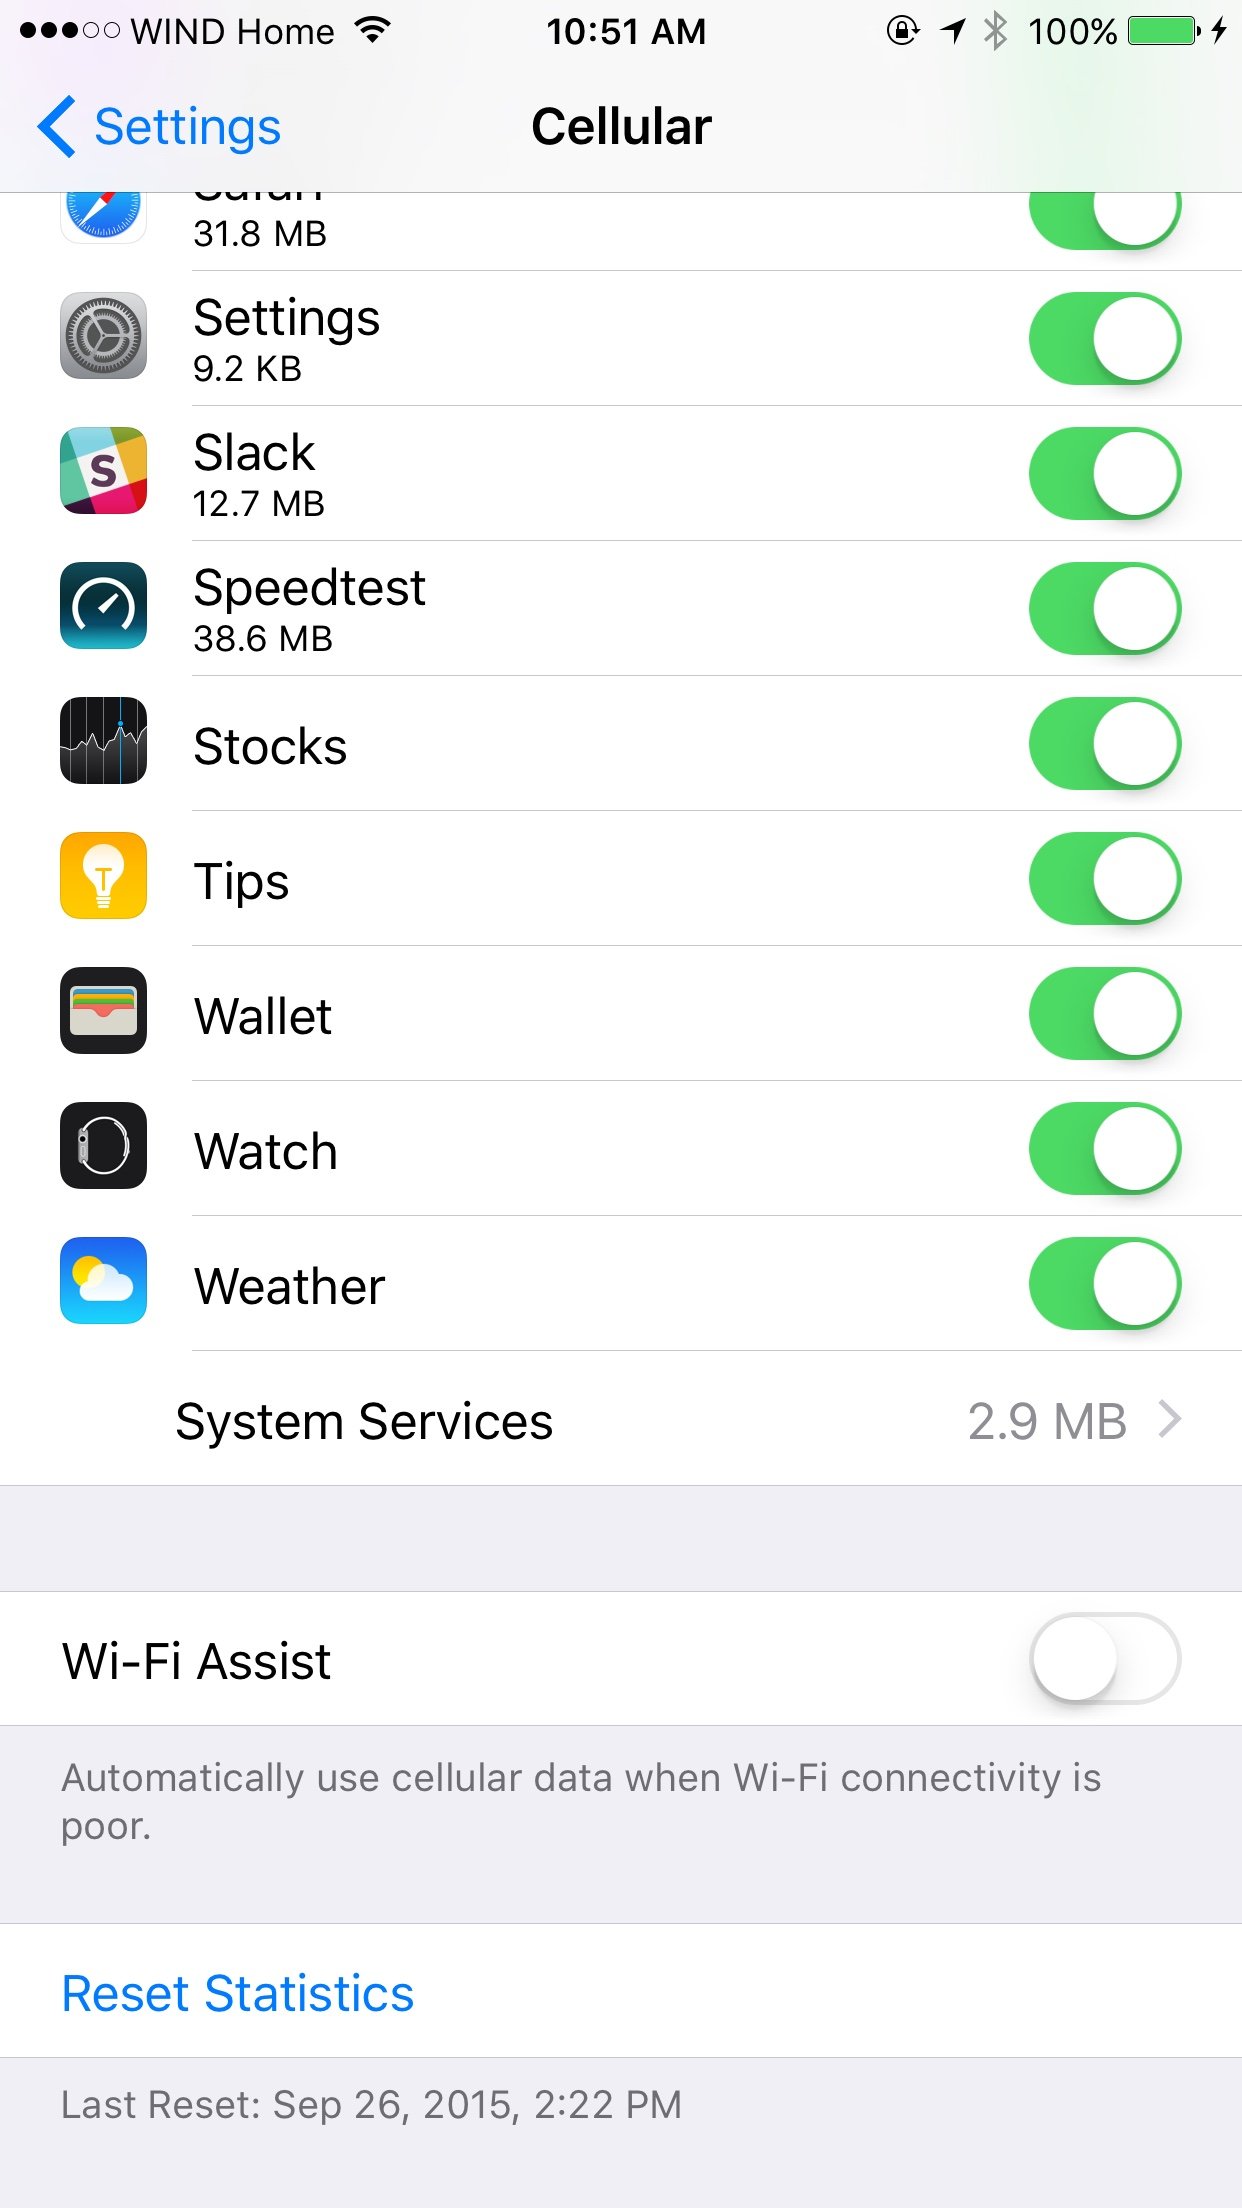 How to Disable Wi-Fi Assist